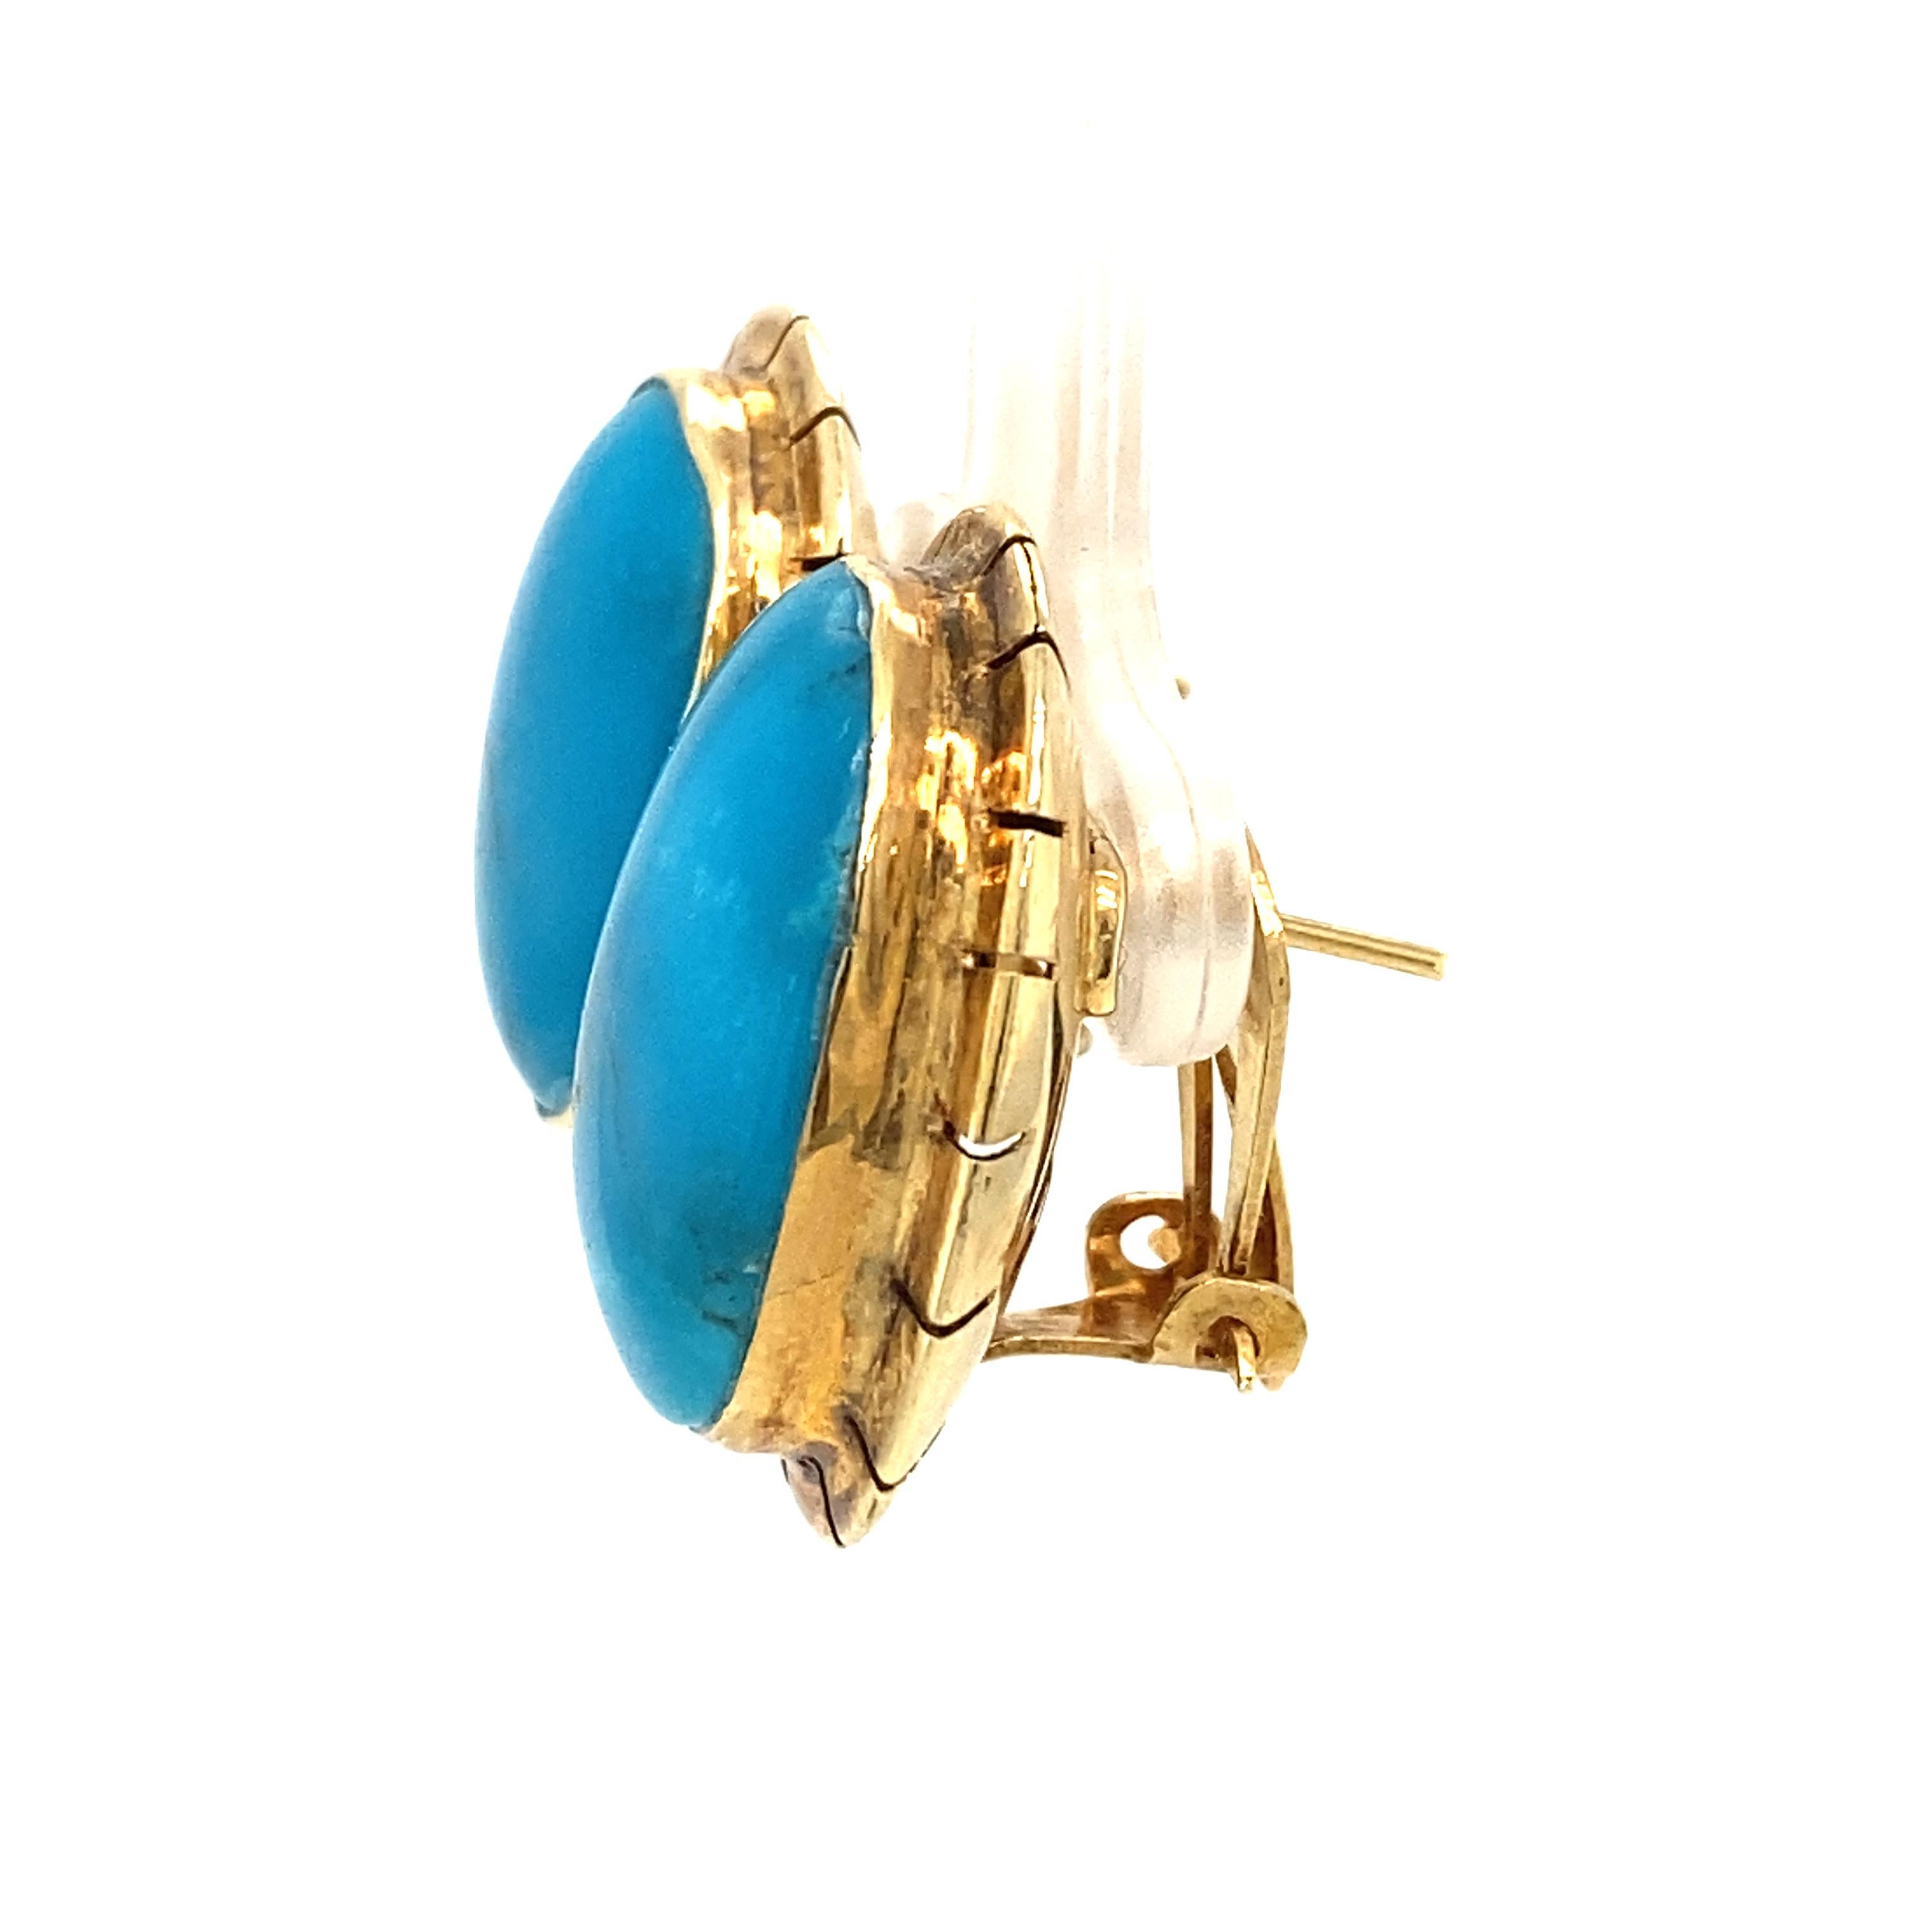 Women's Retro Oval Turquoise Earrings in 14 Karat Yellow Gold, circa 1960s For Sale